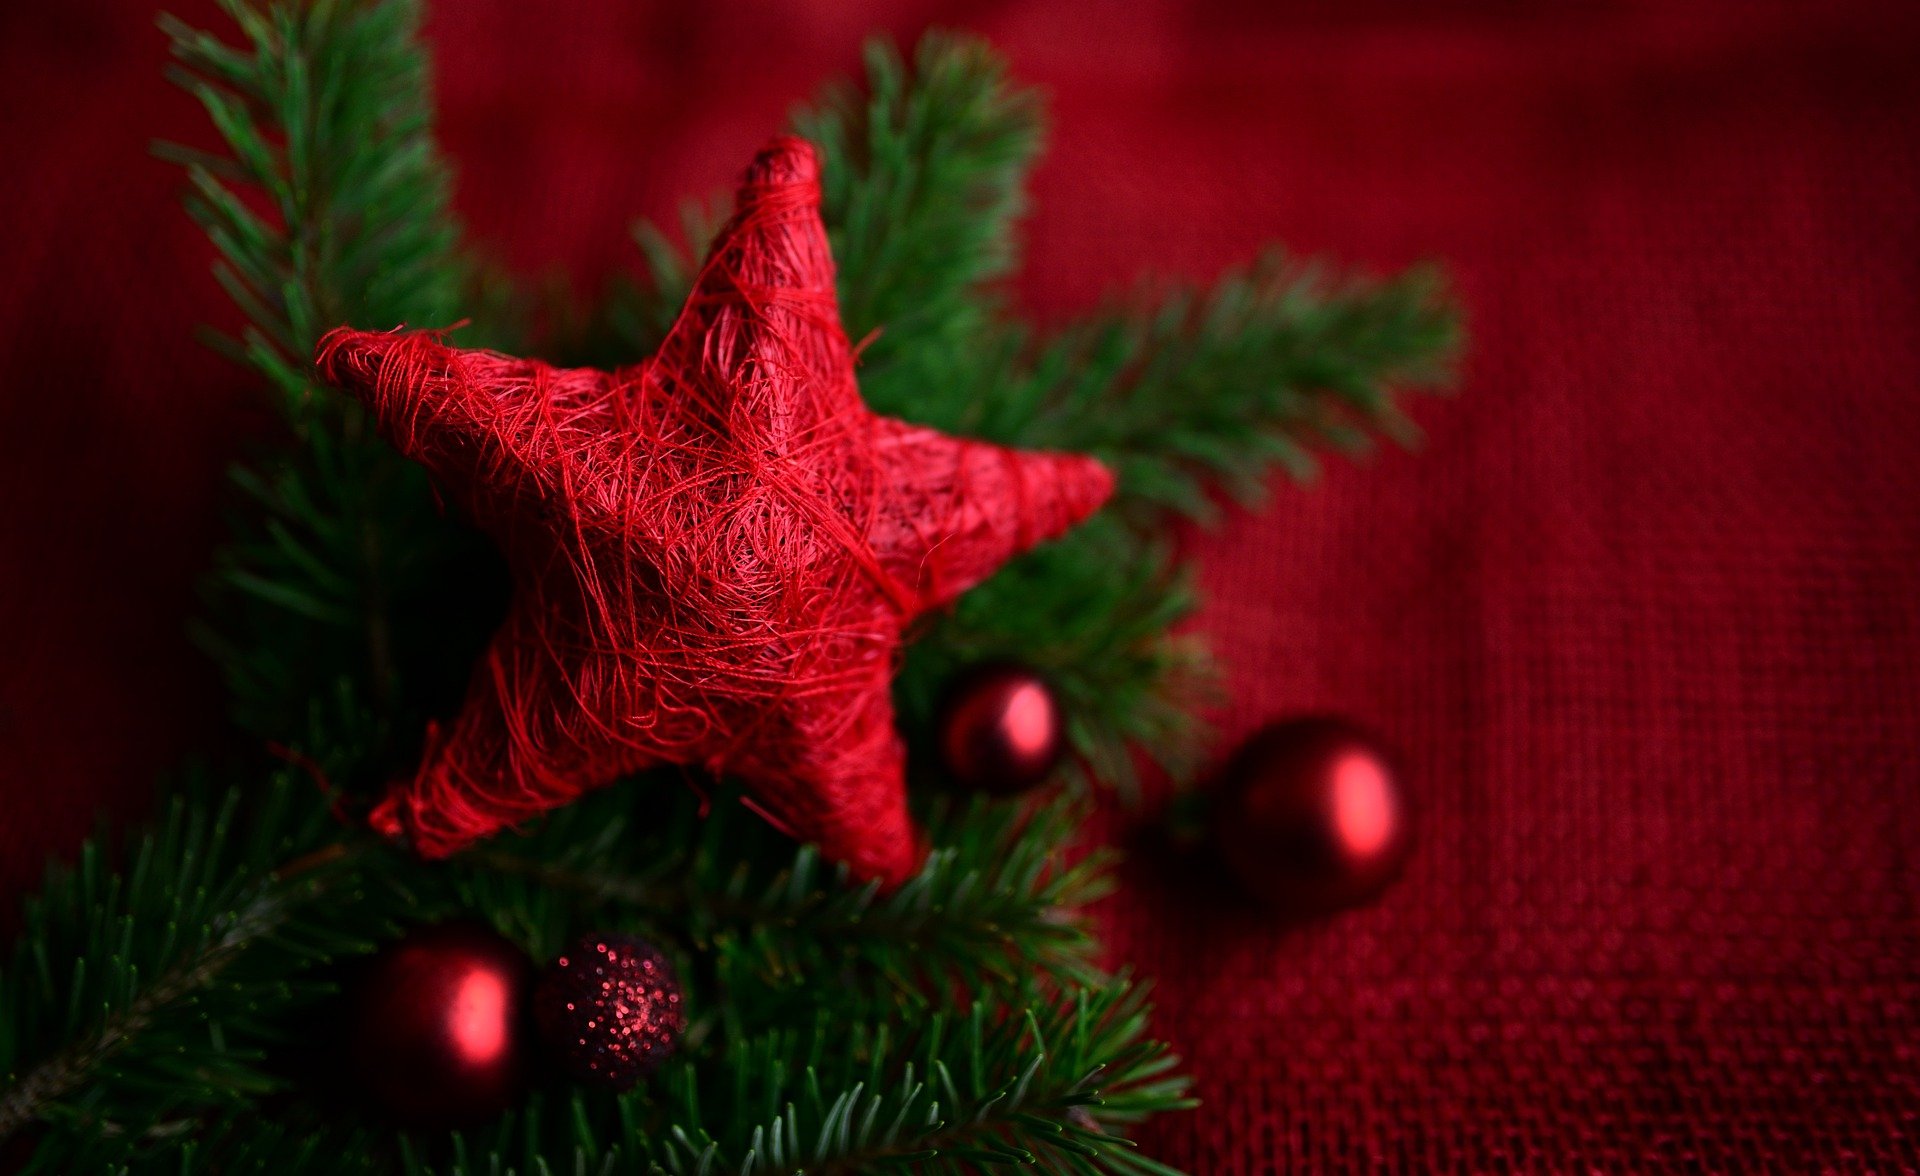 Picture of red cloth shaped like a star with greenery and red balls in the background